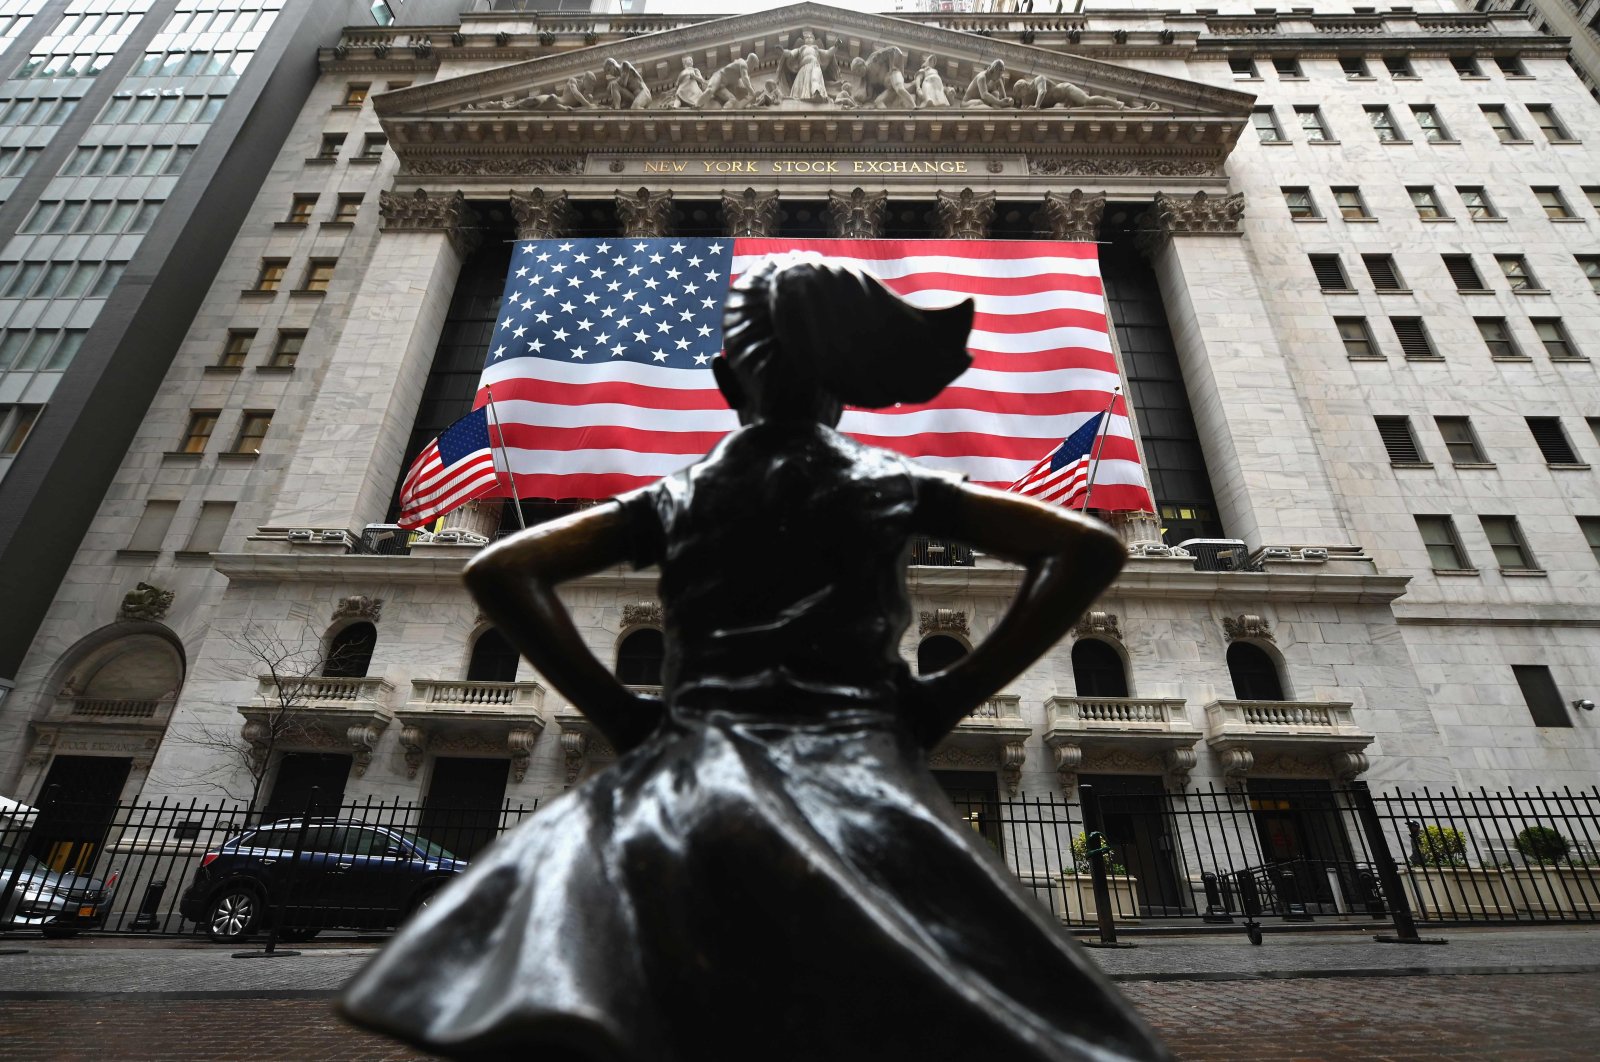 The Fearless Girl statue stands in front of the New York Stock Exchange near Wall Street in New York City, March 23, 2020. (AFP Photo)